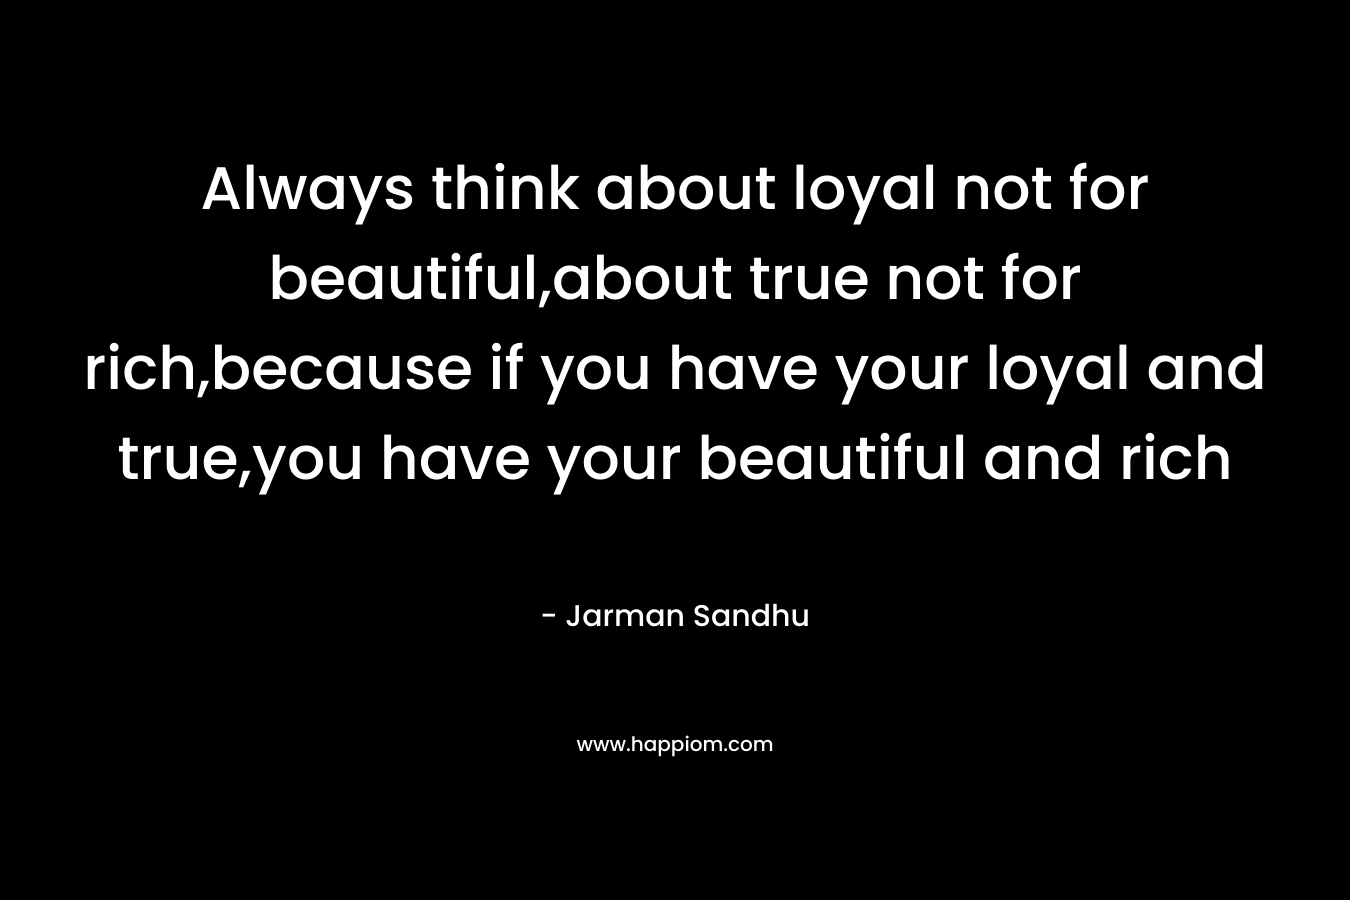 Always think about loyal not for beautiful,about true not for rich,because if you have your loyal and true,you have your beautiful and rich